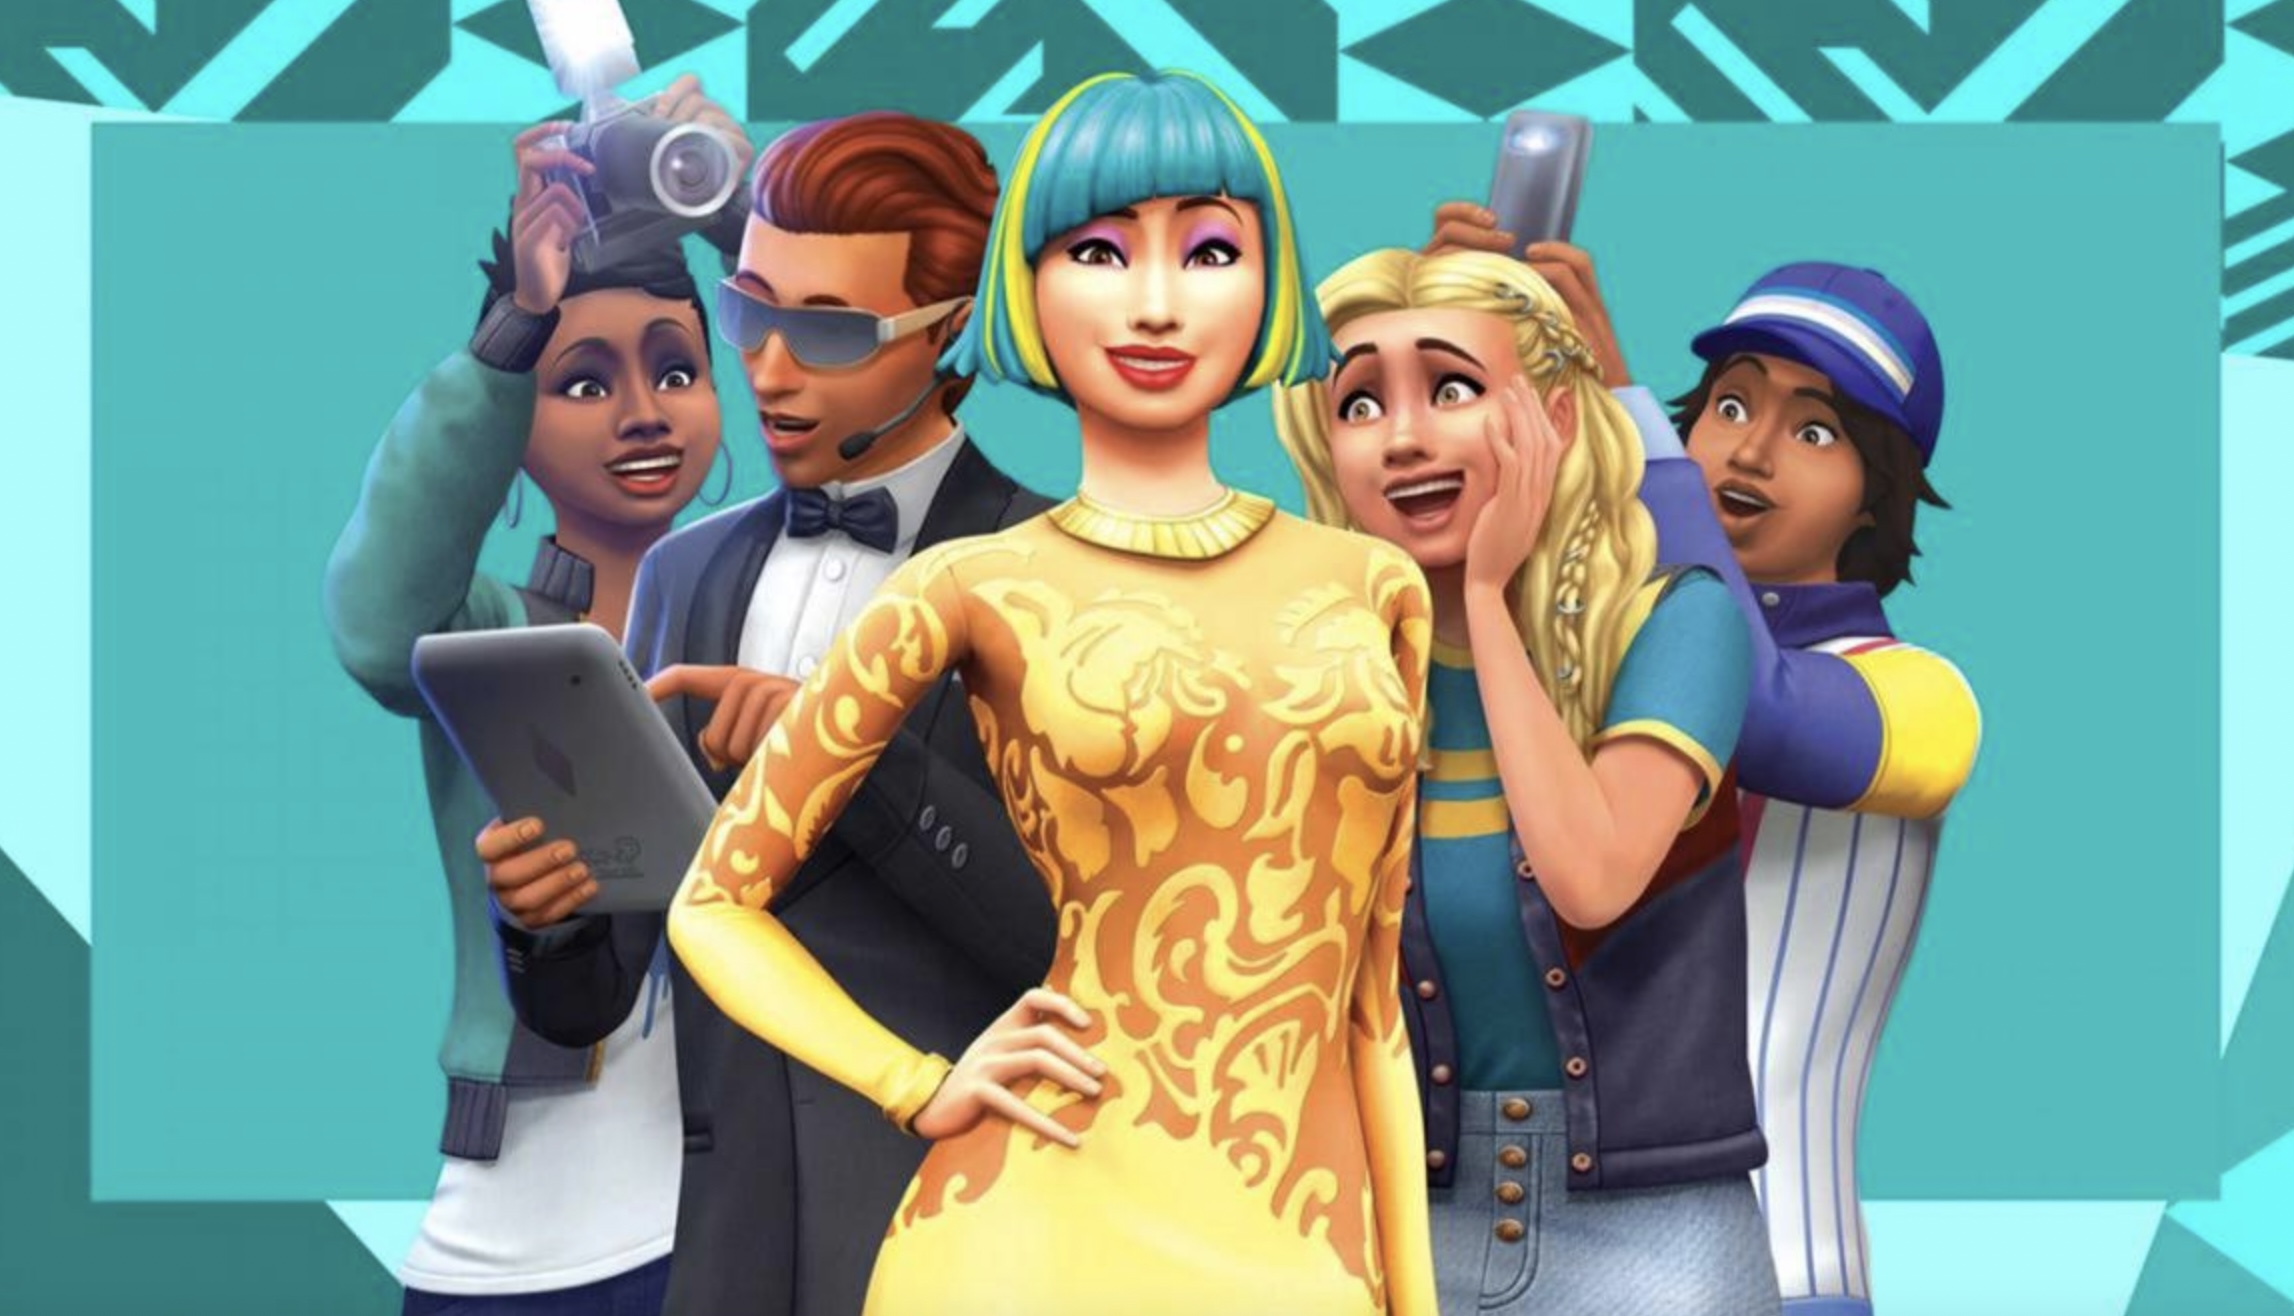 Sims 4 Mods May 2022 Download